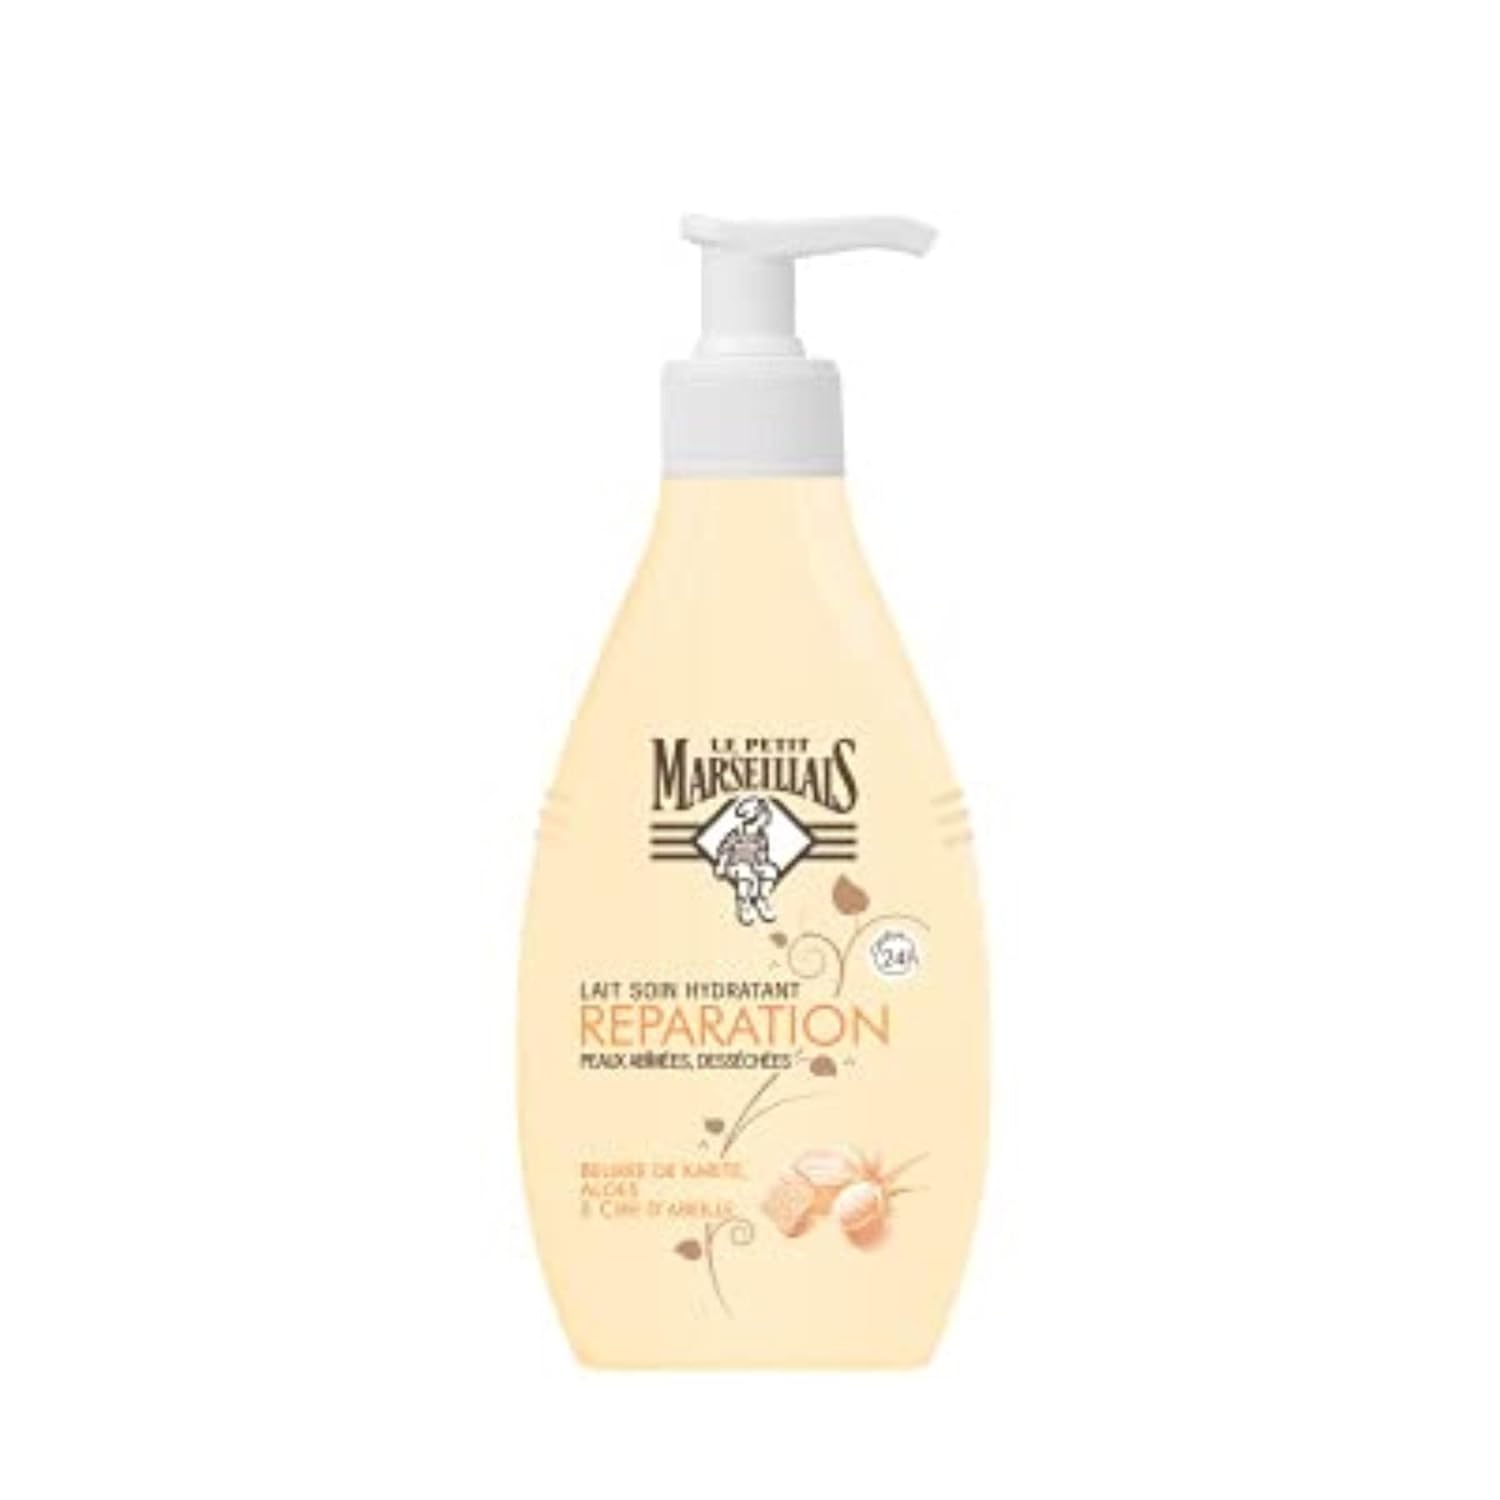 Le Petit Marseillais Repair Milk for Damaged and Dry Skin - The Bottle of 250 ml